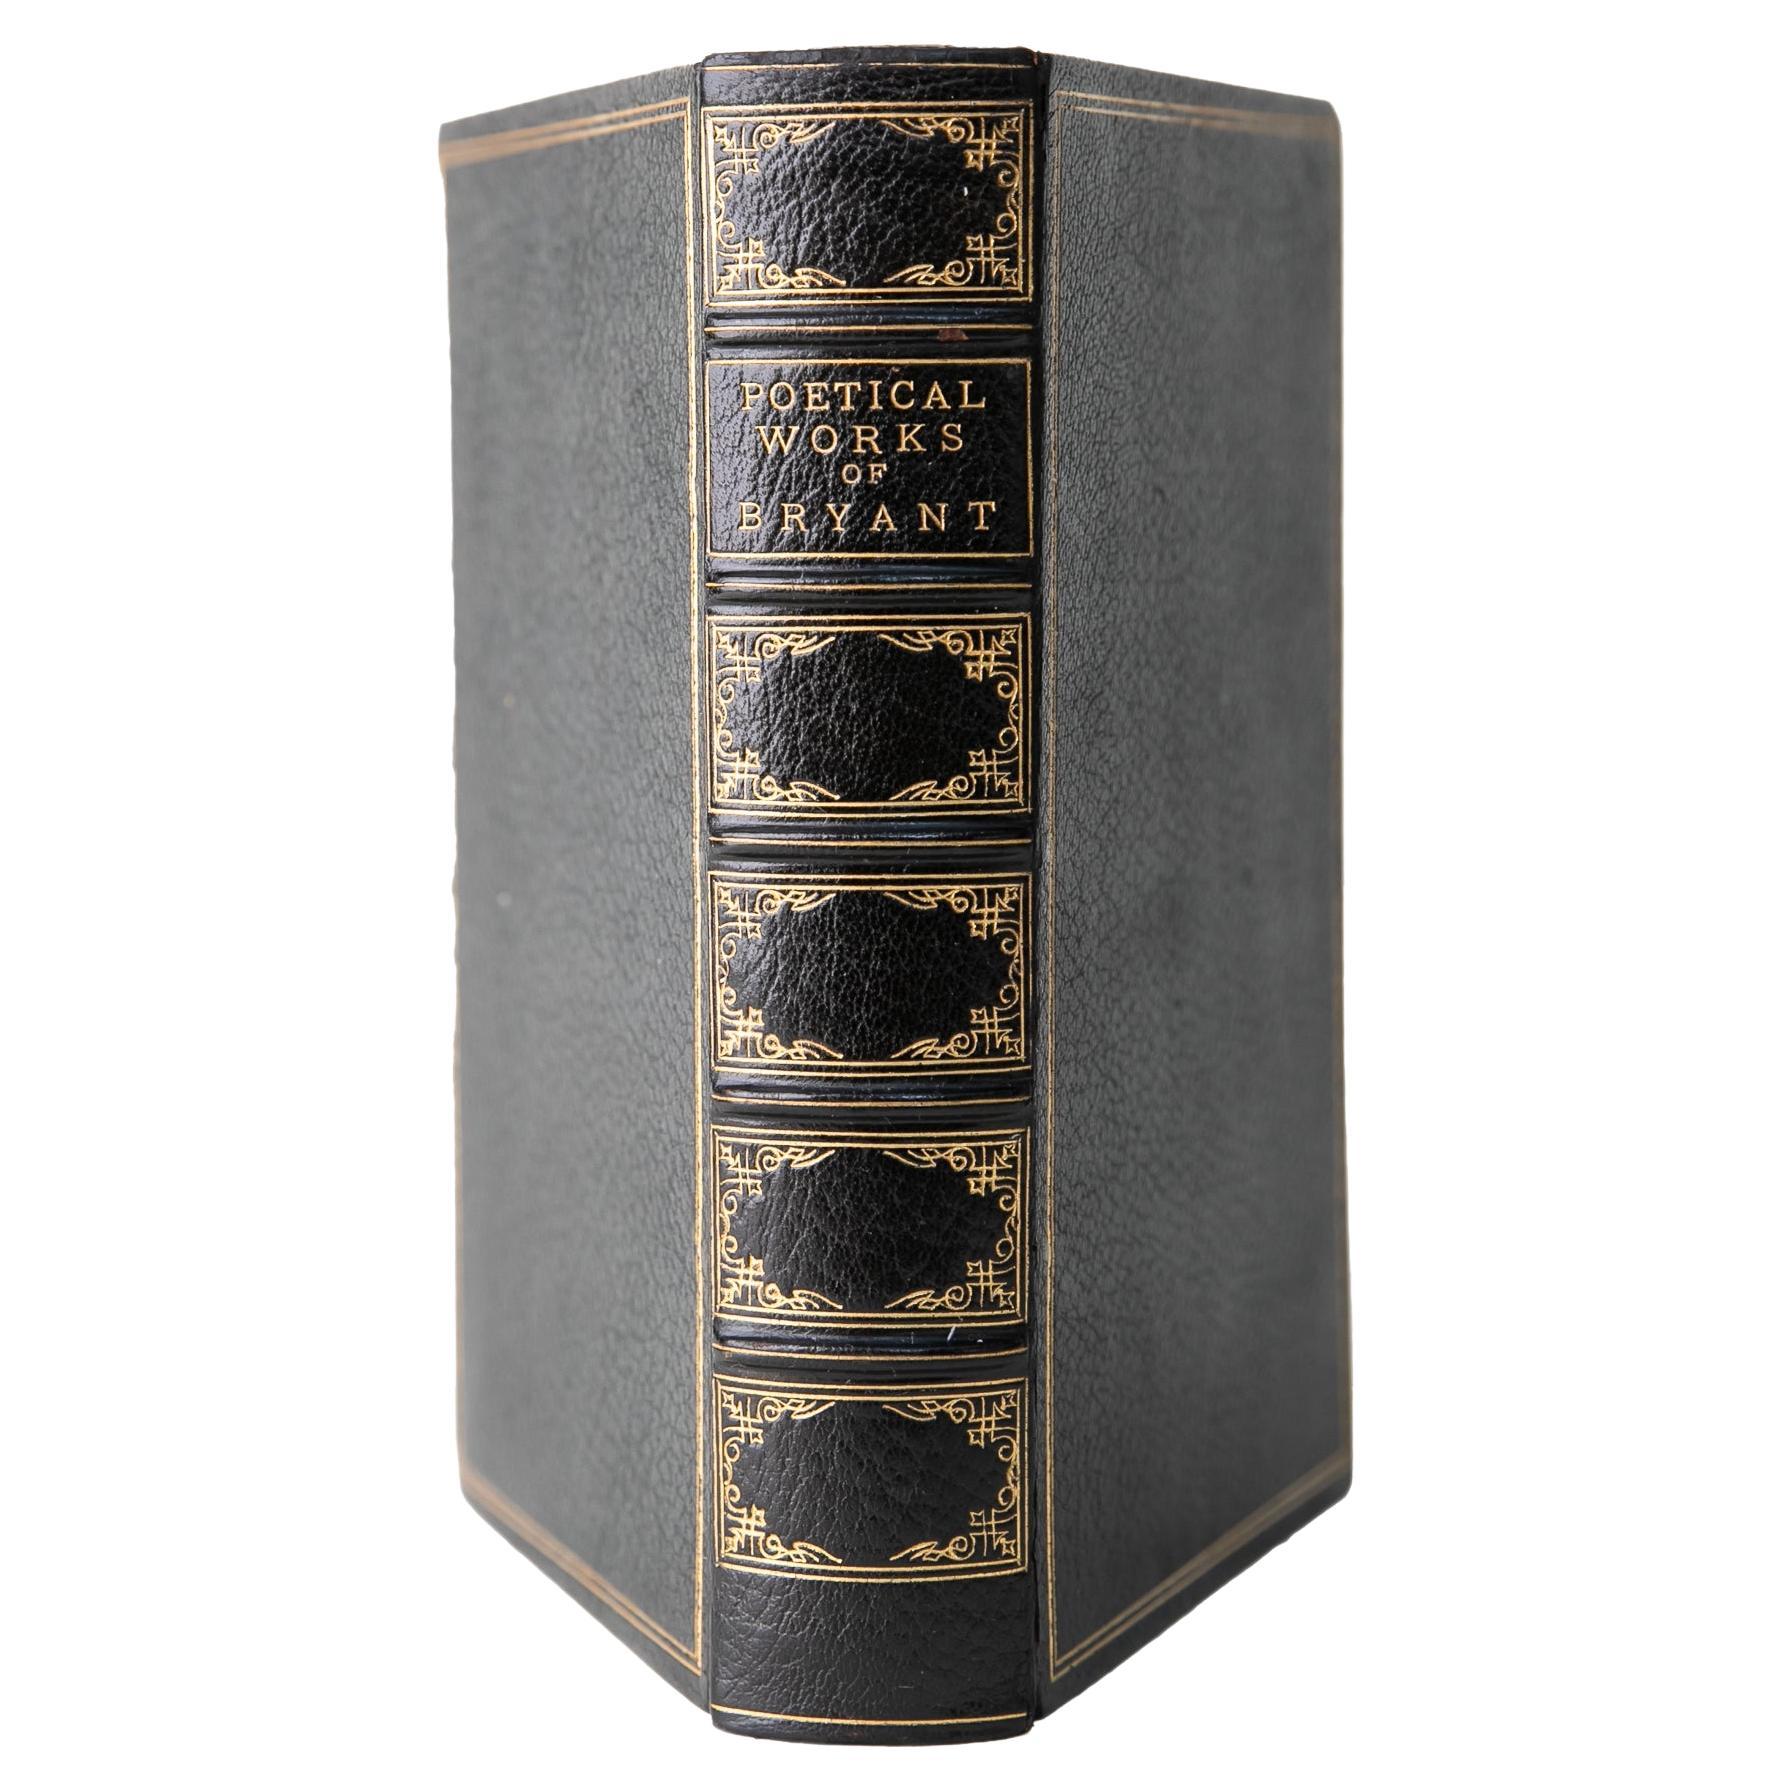 1 Band. William Cullen Bryant, The Poetical Works. im Angebot